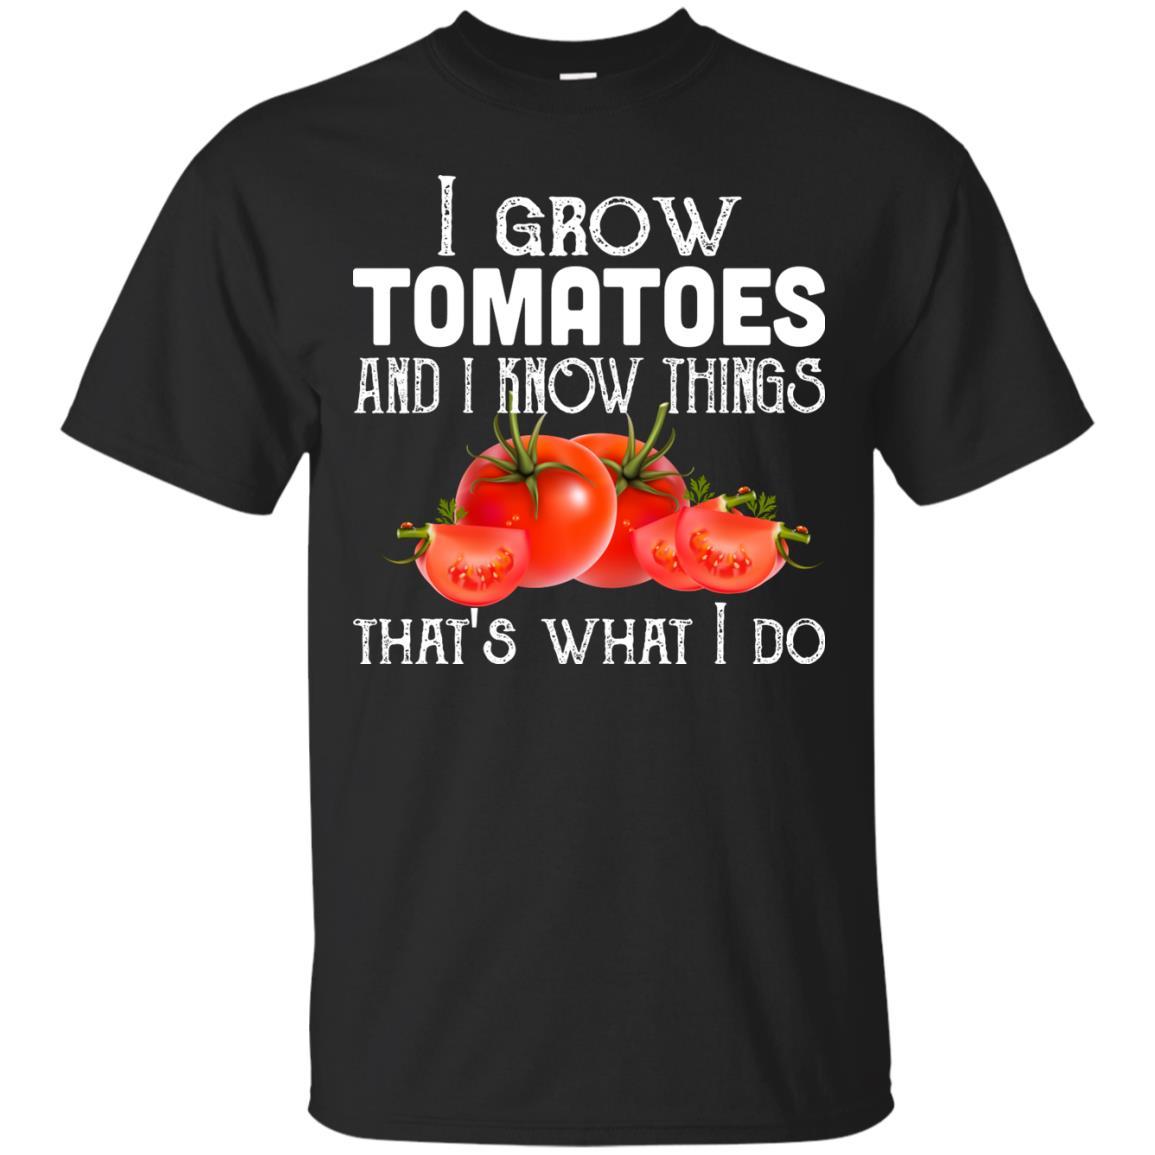 Funny shirt i Grow Tomatoes and i Know Things Unisex Tees - GoneBold.gift